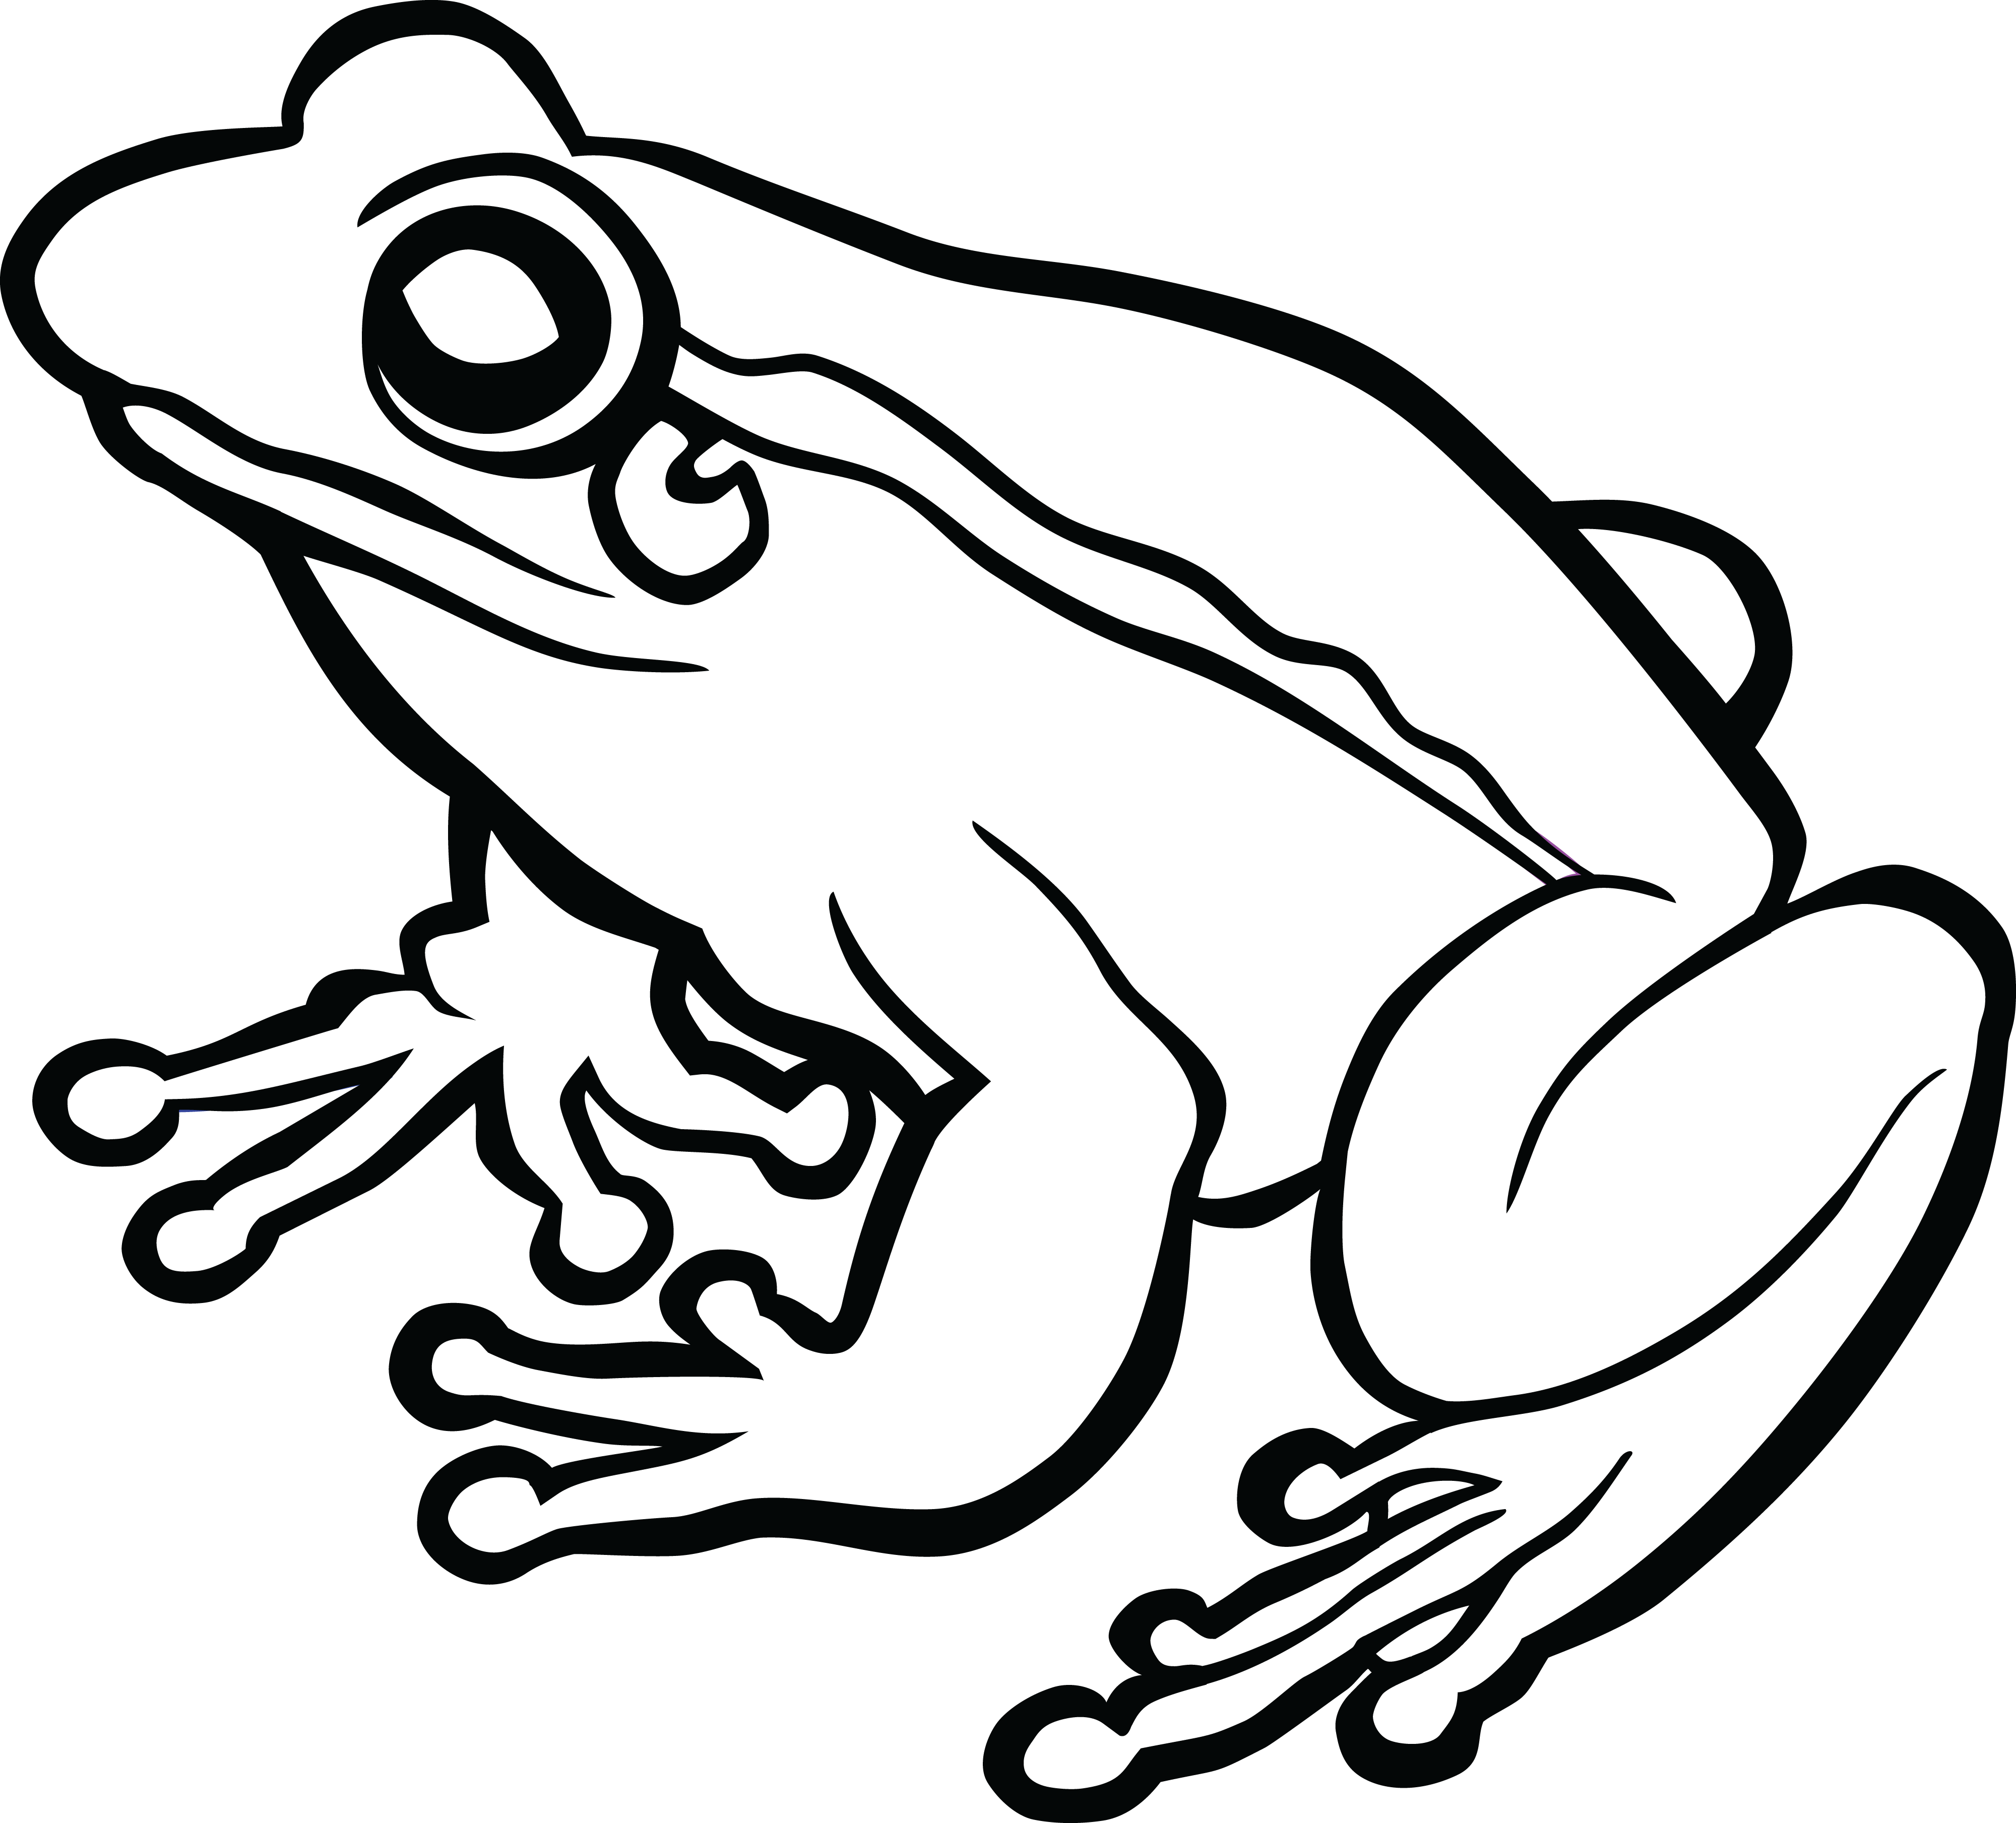  Clipart Of A frog #00011510 ., Toad PNG Black And White - Free PNG